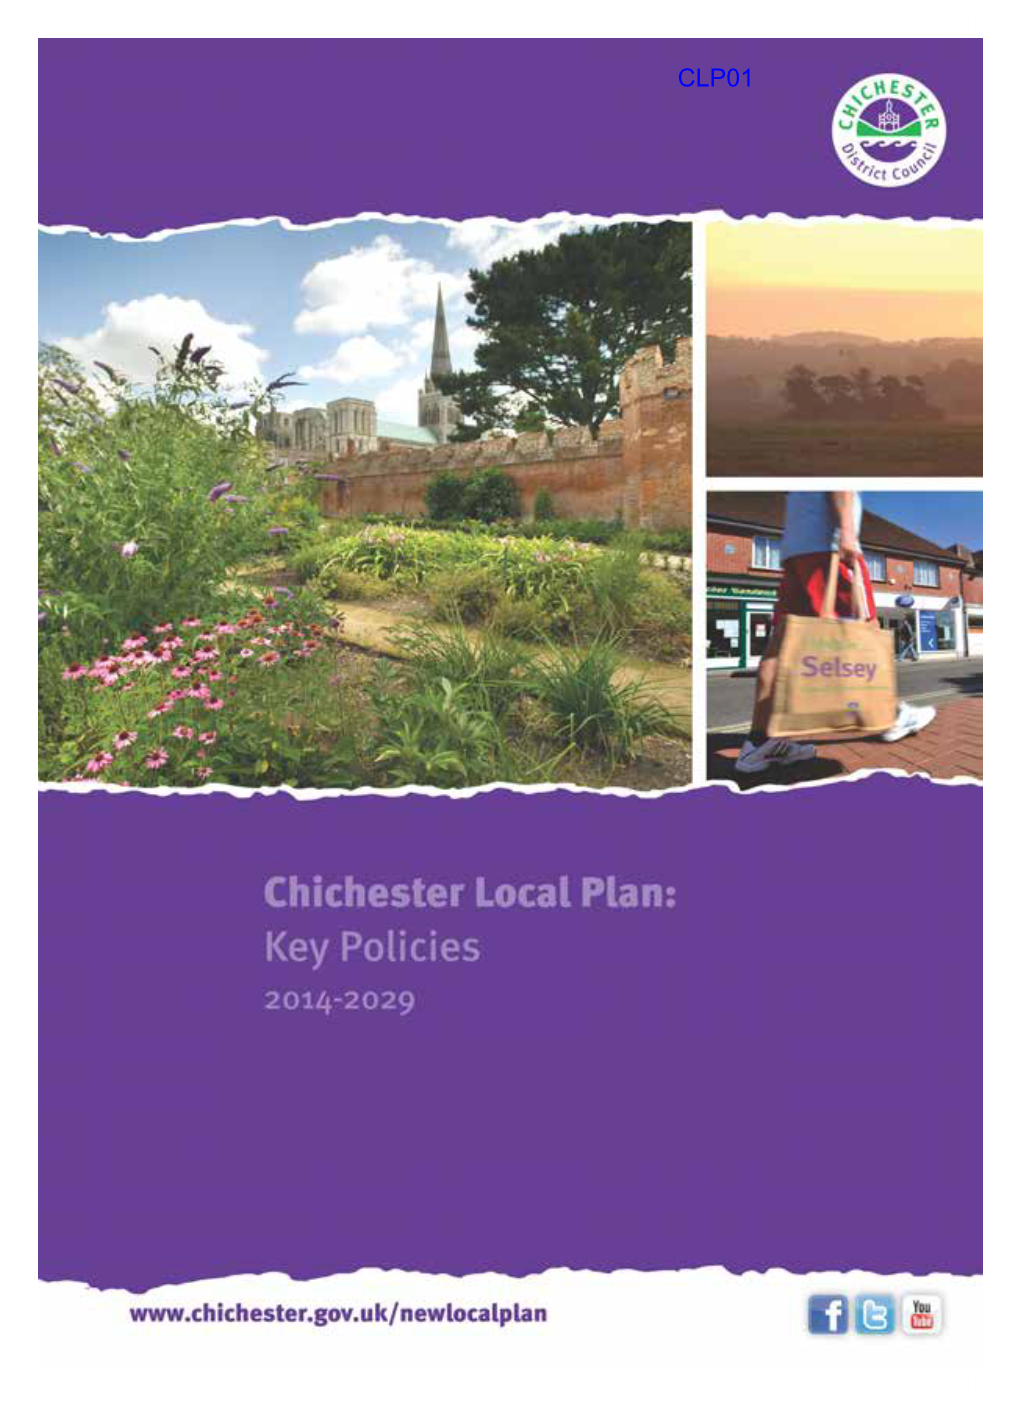 Chichester Local Plan: Key Policies 2014-2029